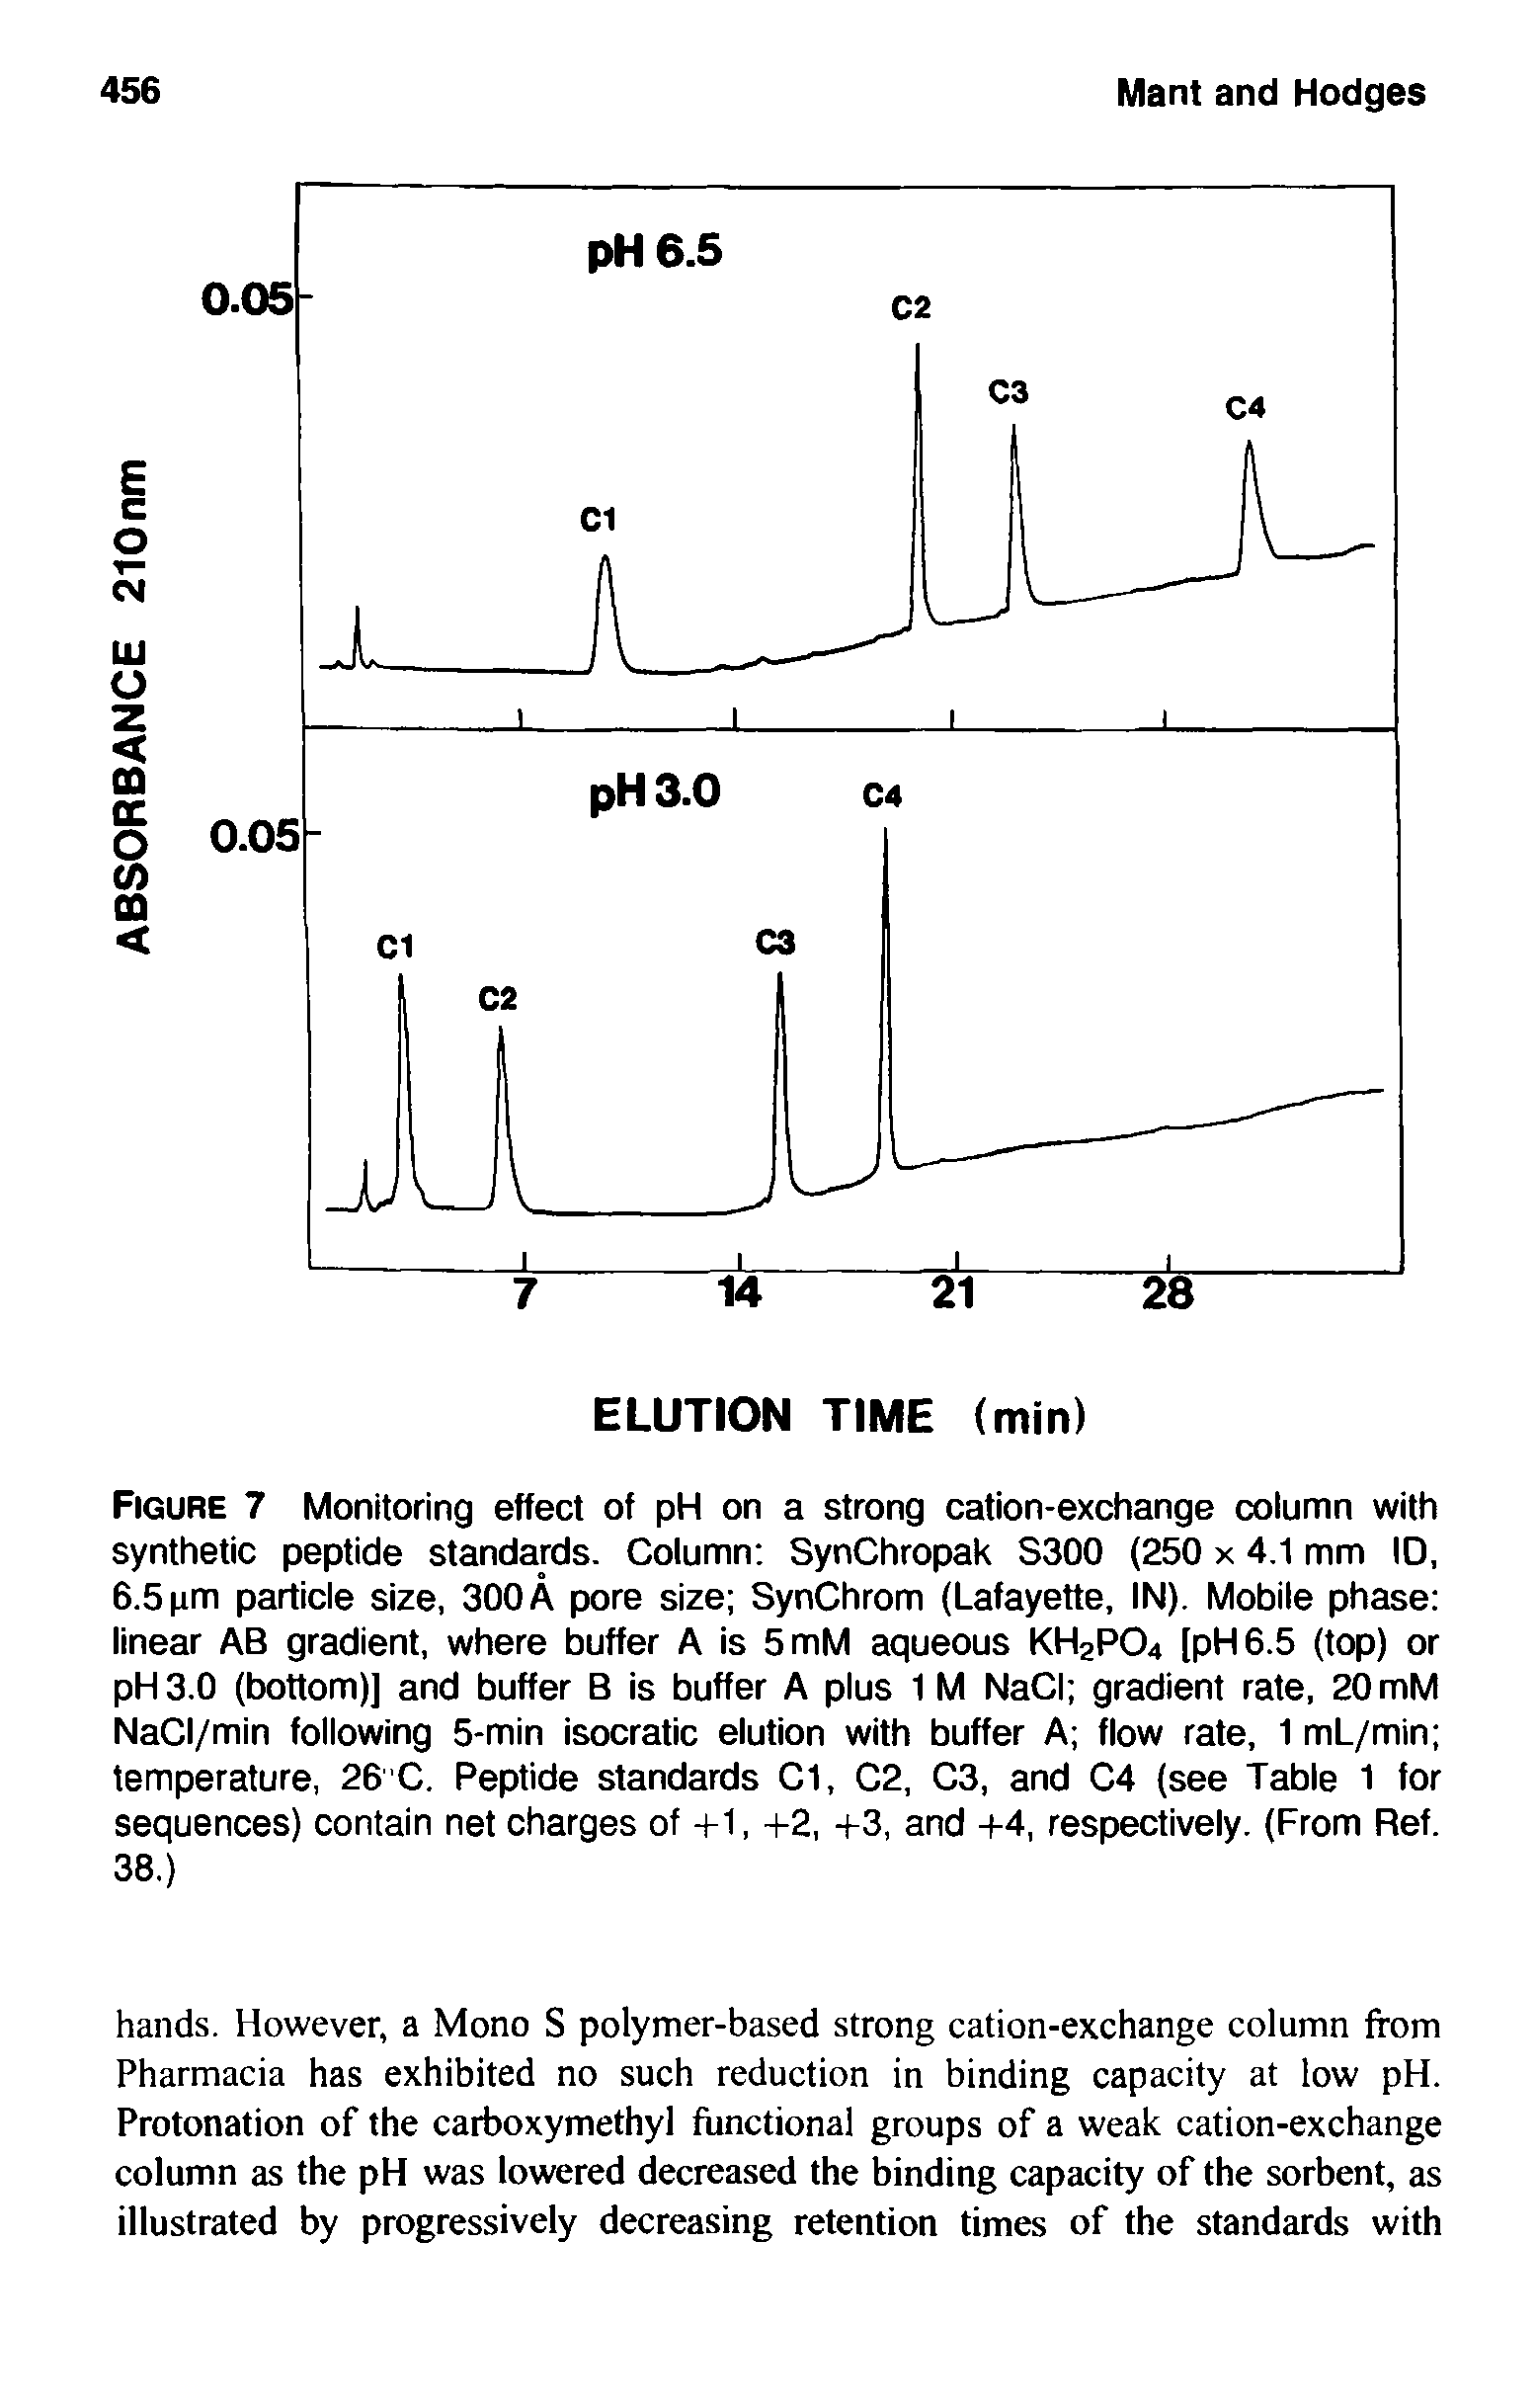 Figure 7 Monitoring effect of pH on a strong cation-exchange column with synthetic peptide standards. Column SynChropak S300 (250 x 4,1 mm ID, 6.5 (im particle size, 300 A pore size SynChrom (Lafayette, IN). Mobile phase linear AB gradient, where buffer A is 5mM aqueous KHaP04 [pH 6.5 (top) or pH 3.0 (bottom)] and buffer B is buffer A plus 1 M NaCI gradient rate, 20 mM NaCI/min following 5-min isocratic elution with buffer A flow rate, 1 mL/min temperature, 26 C. Peptide standards Cl, C2, C3, and C4 (see Table 1 for sequences) contain net charges of -f 1, -i-2, -i-3, and -i-4, respectively. (From Ref. 38.)...